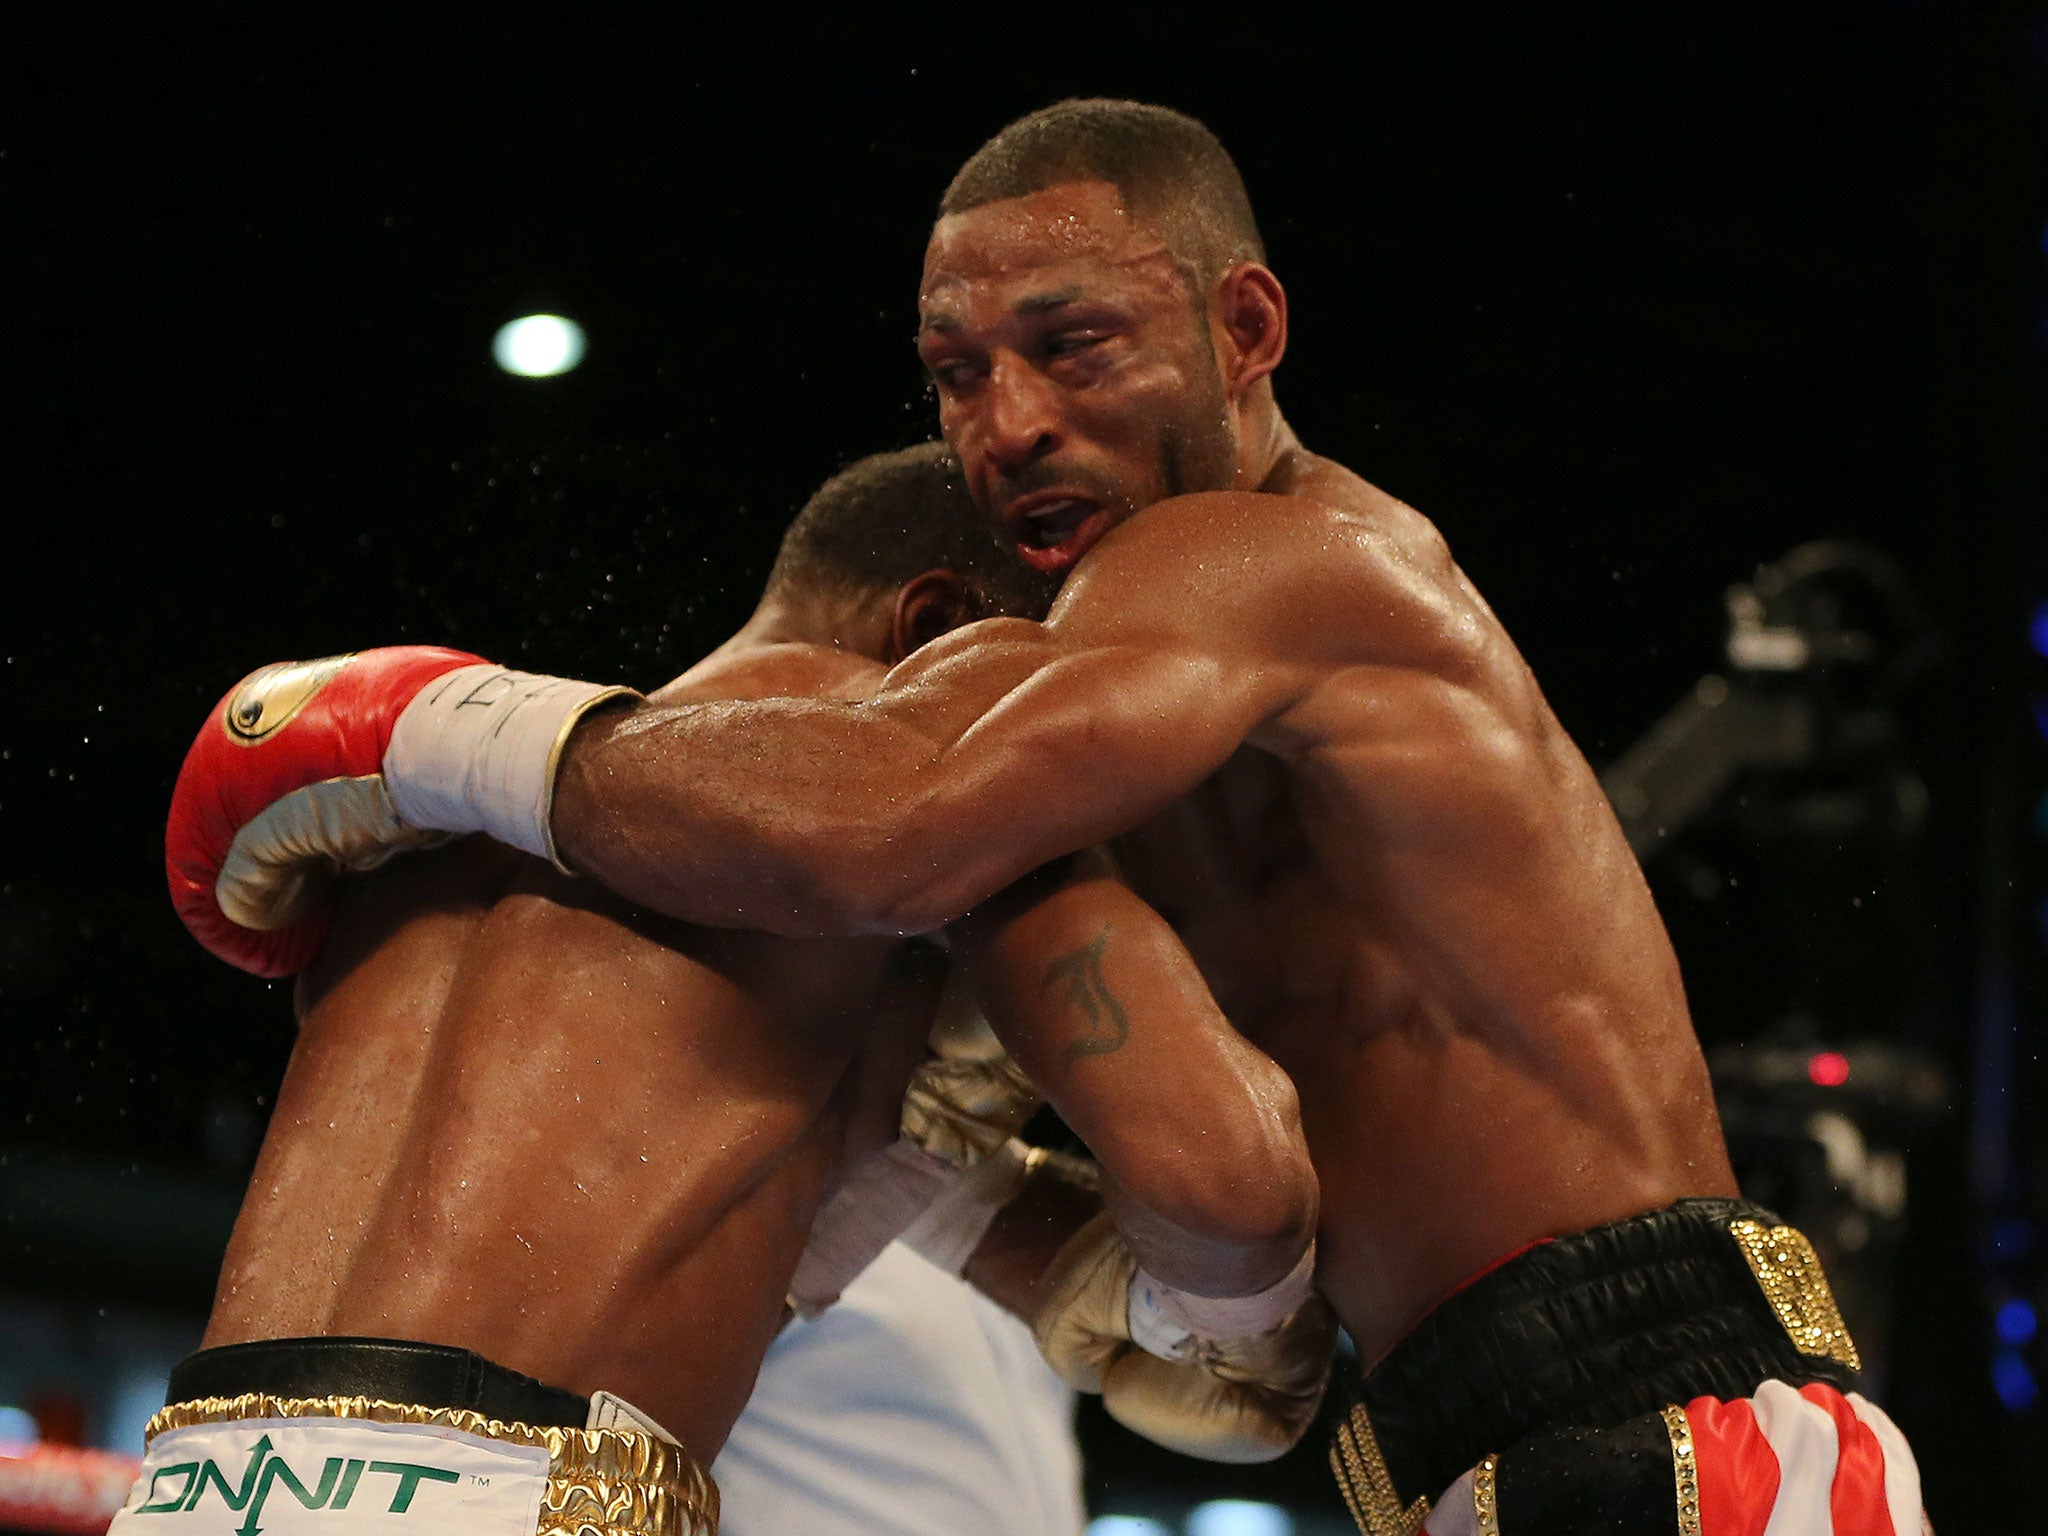 Kell Brook suffered a suspected fractured eye socket in the seventh round of the defeat by Errol Spence Jr